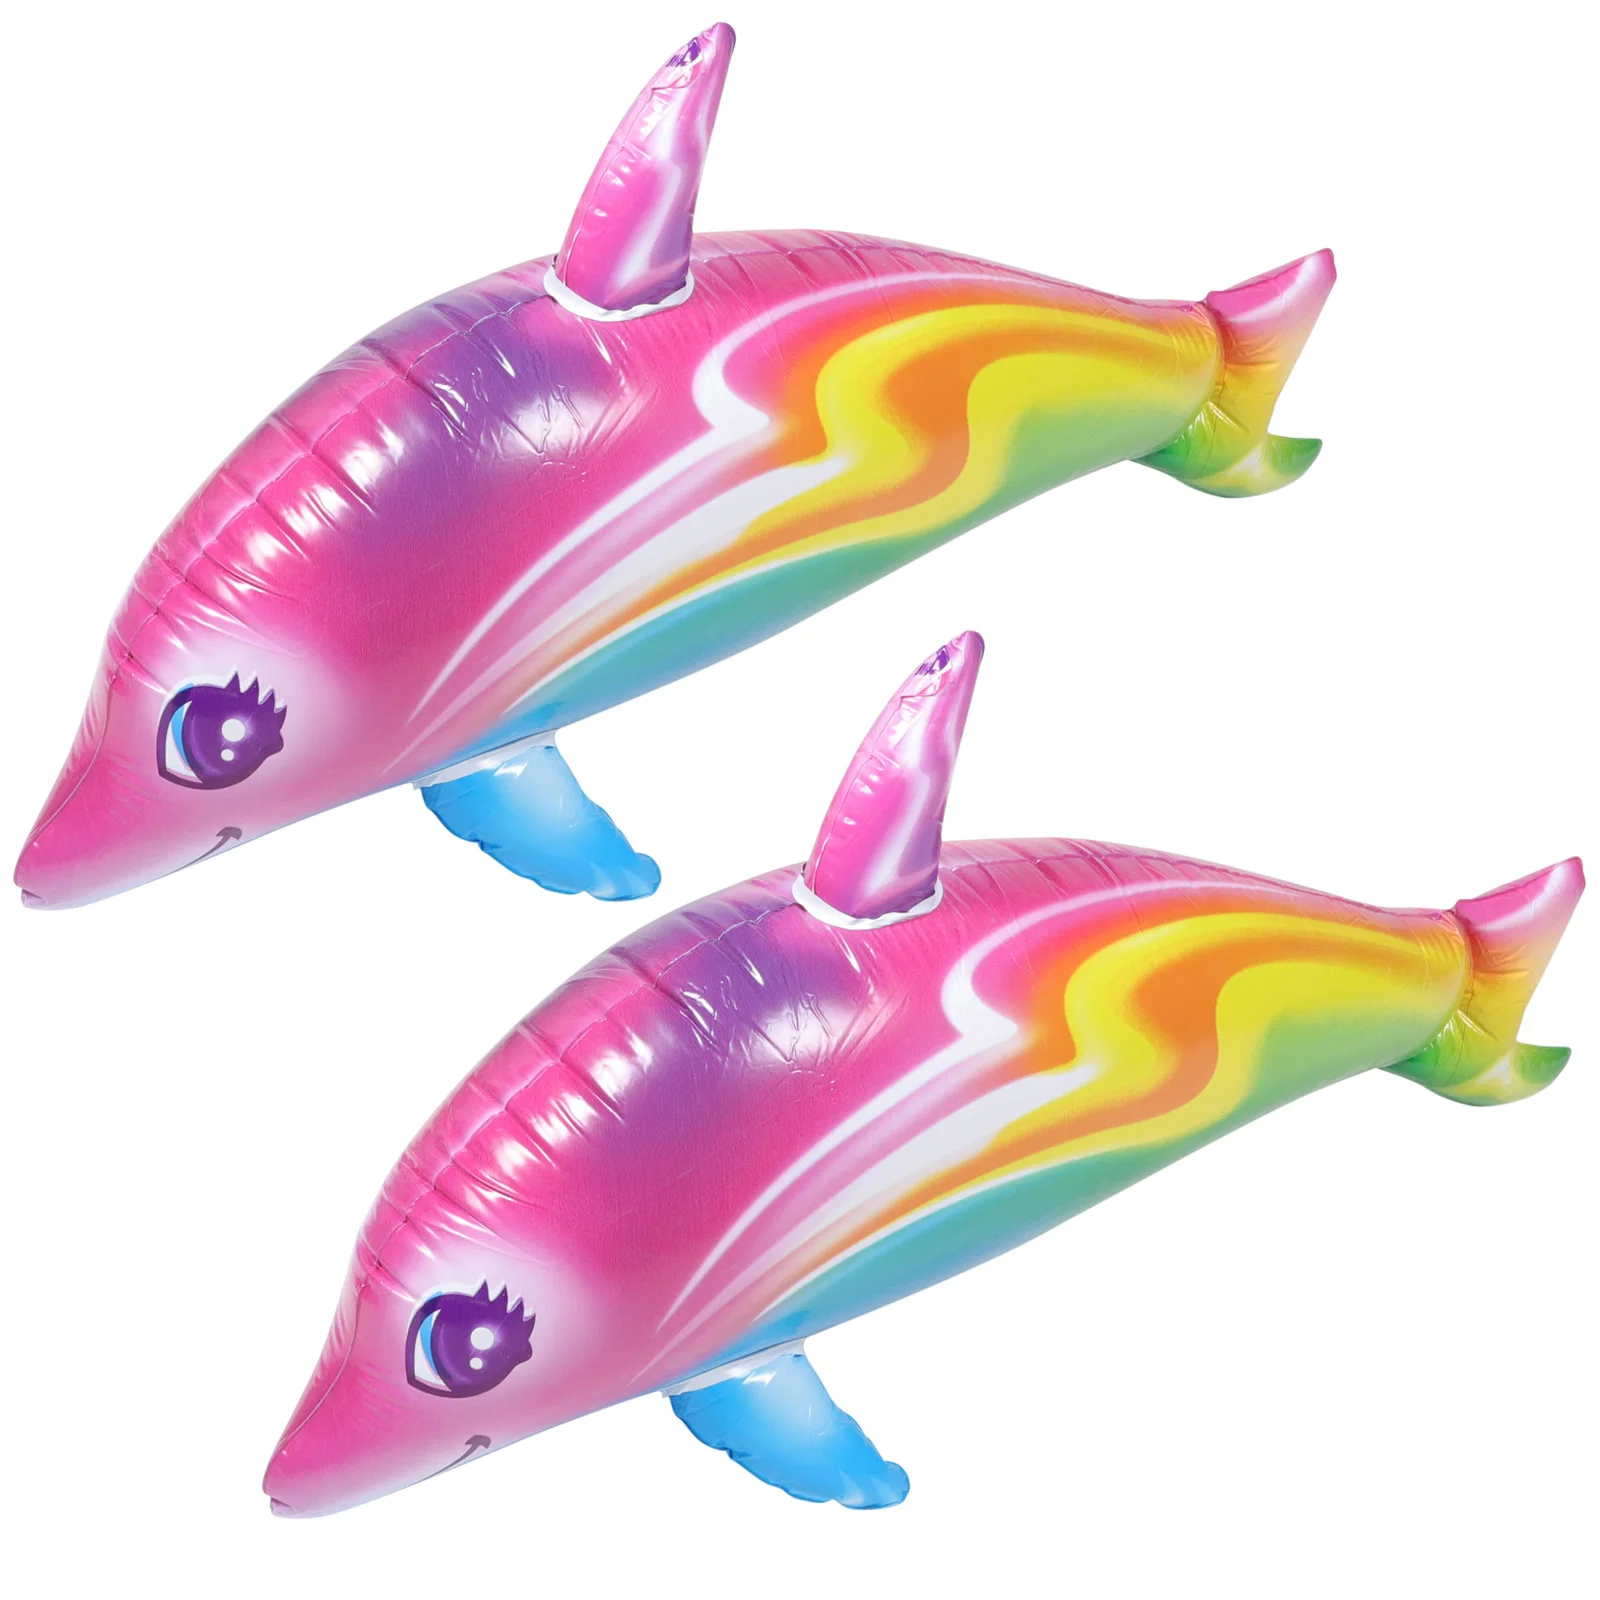 

2 Pcs Toys Inflatable Dolphin Children Giant Kids Educational Party Favors Pool